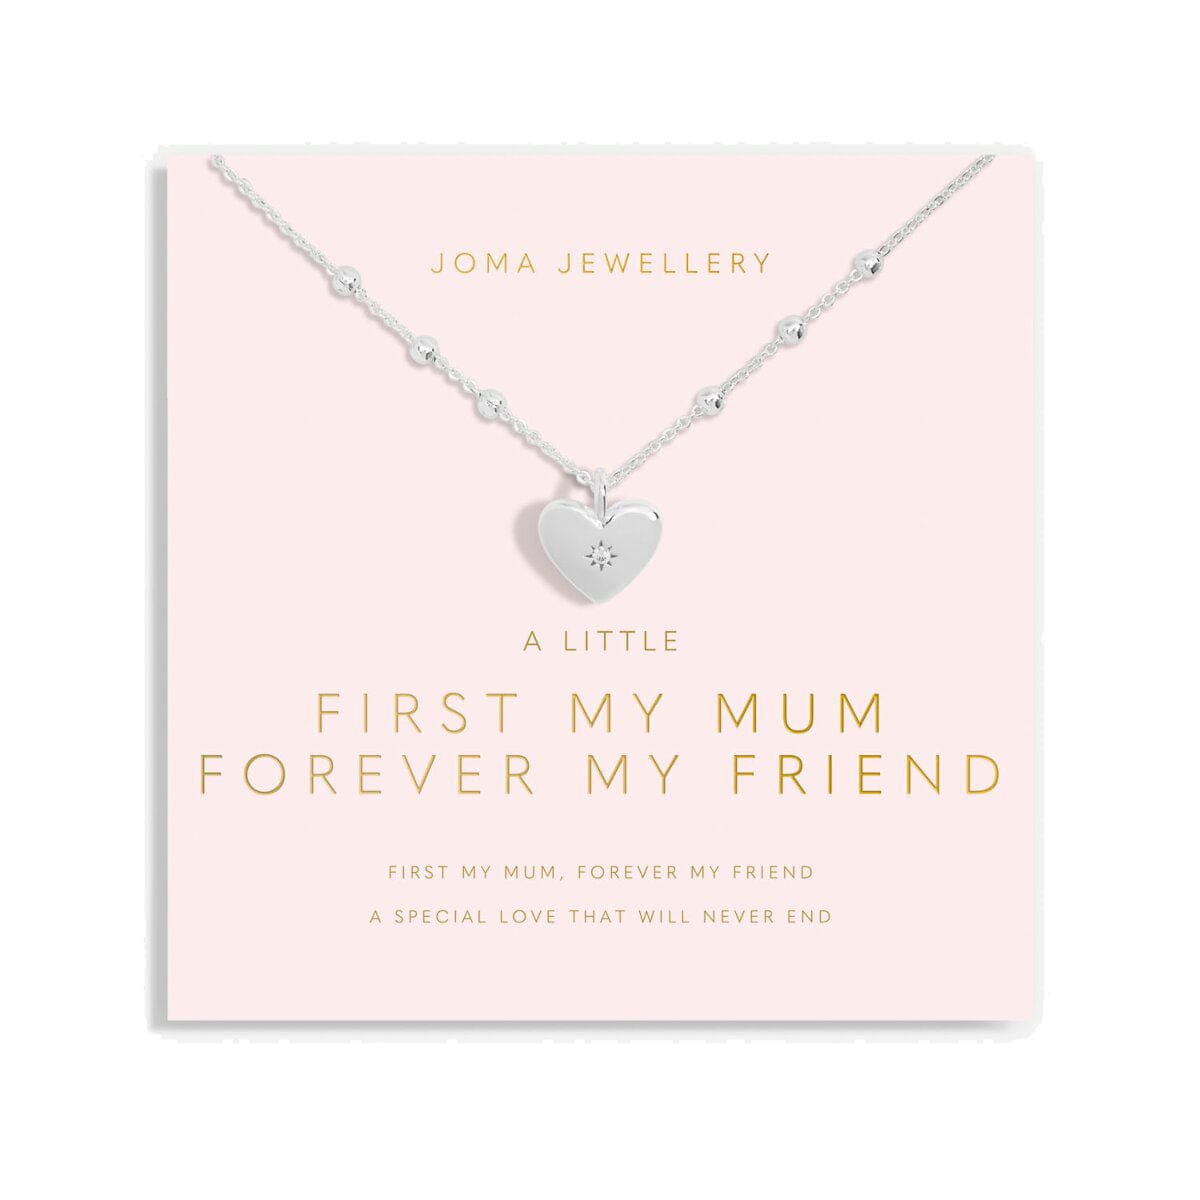 Joma Jewellery Necklaces Copy of Joma Jewellery Necklace -A Little First My Mum Forever My Friend